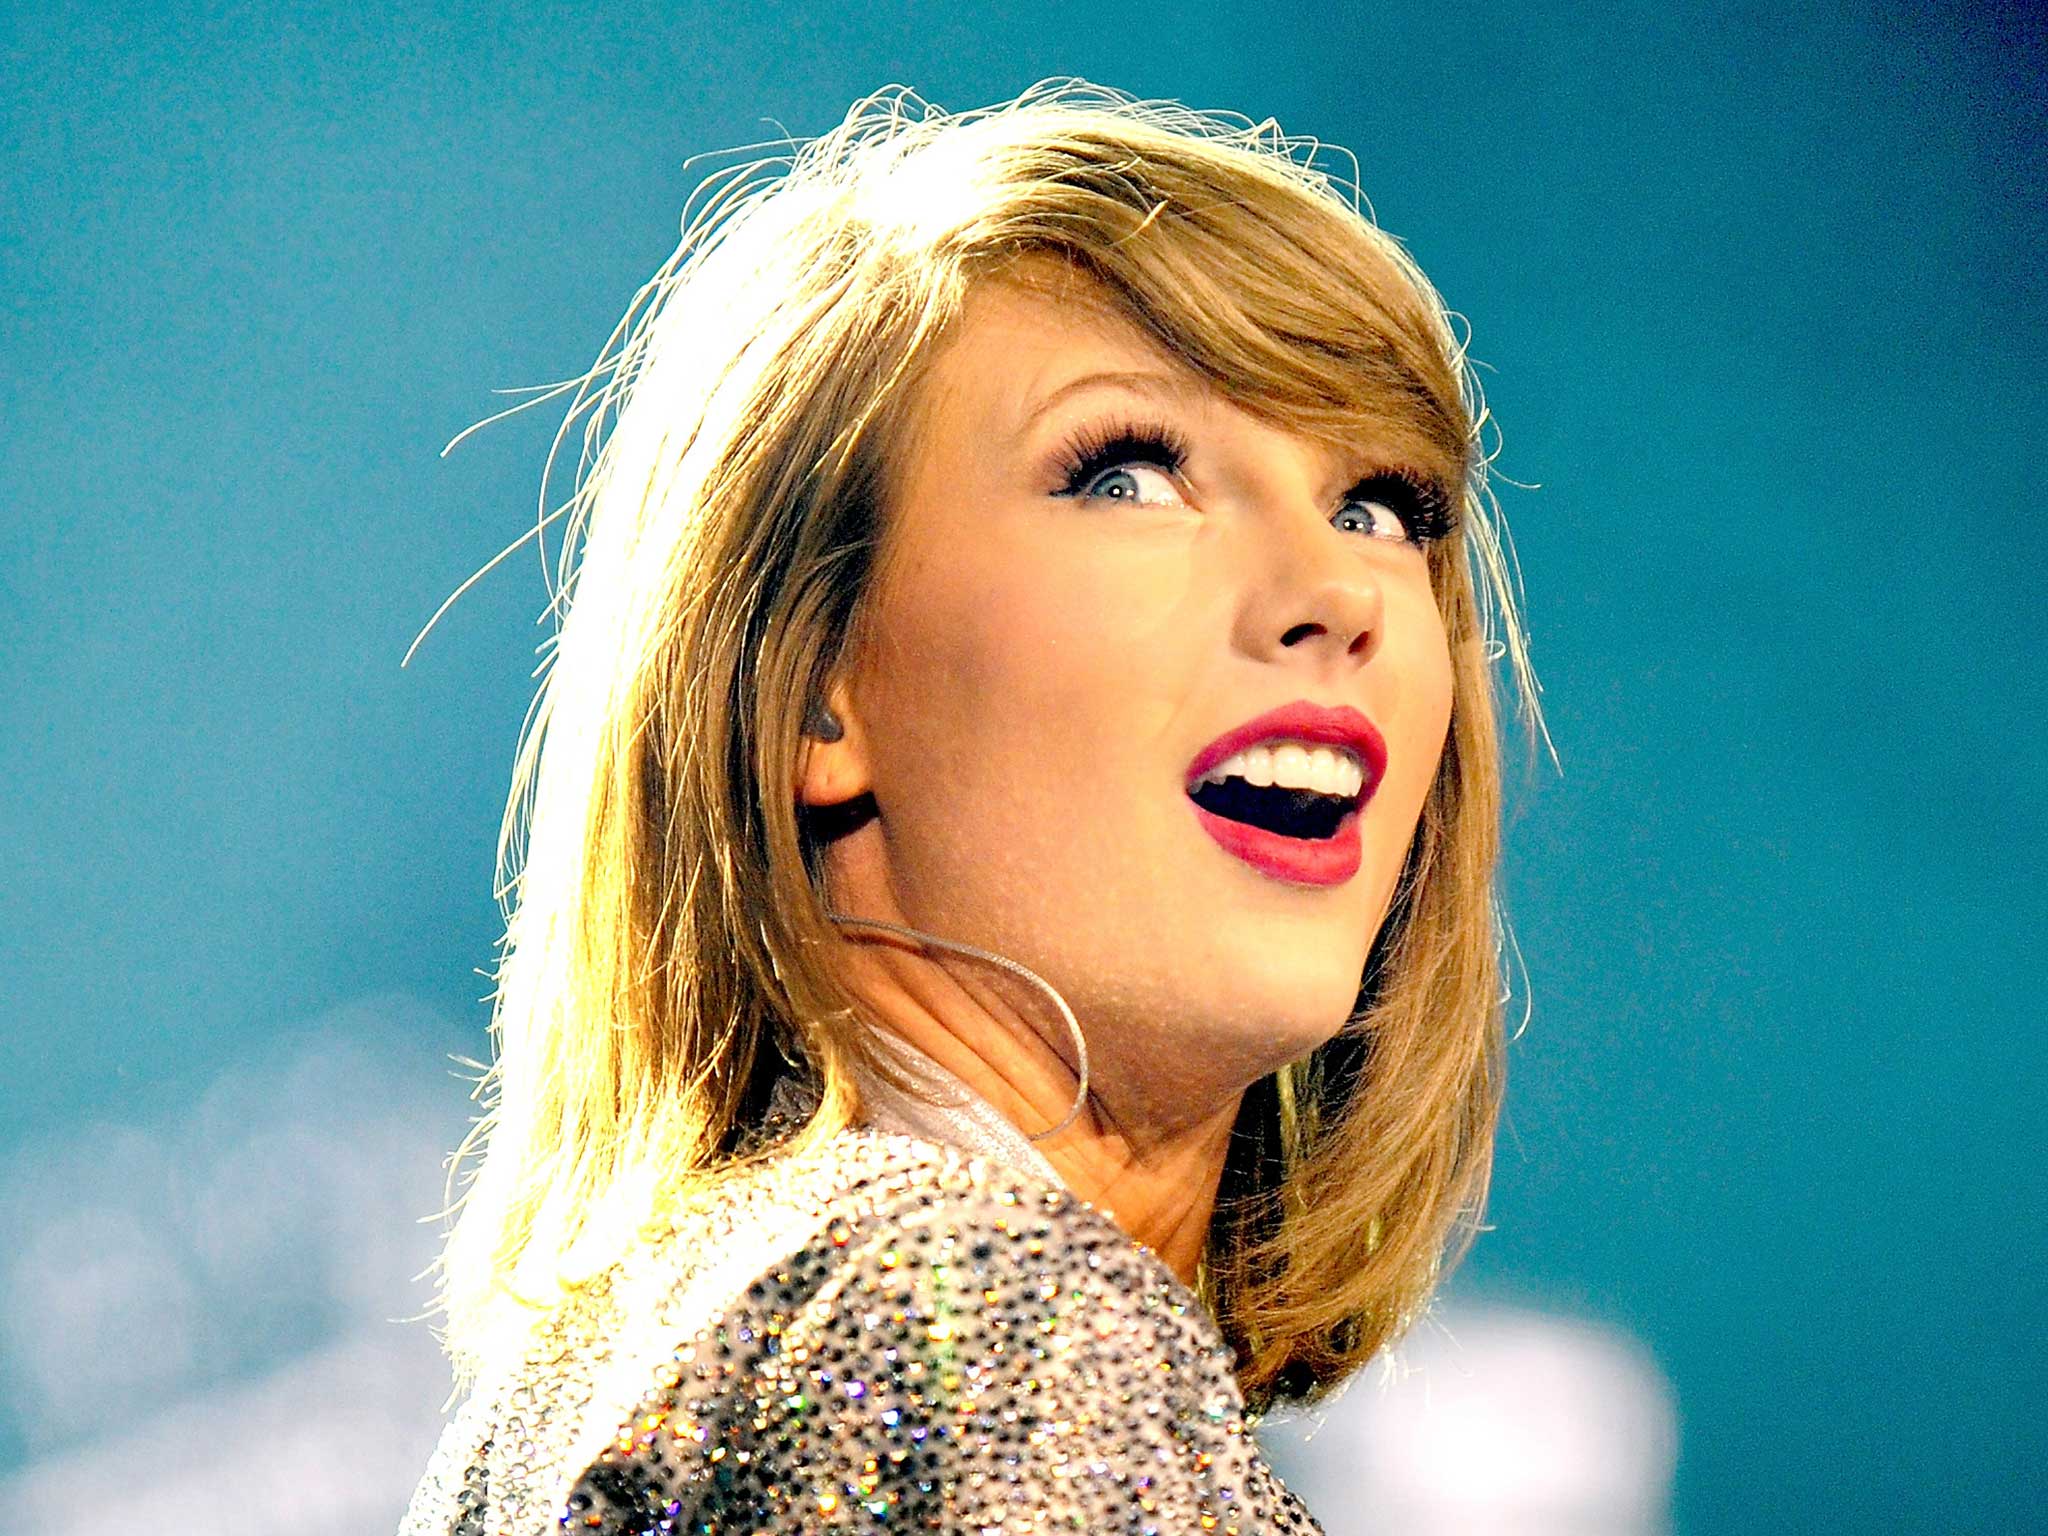 Taylor Swift To Release Wildest Dreams Next From